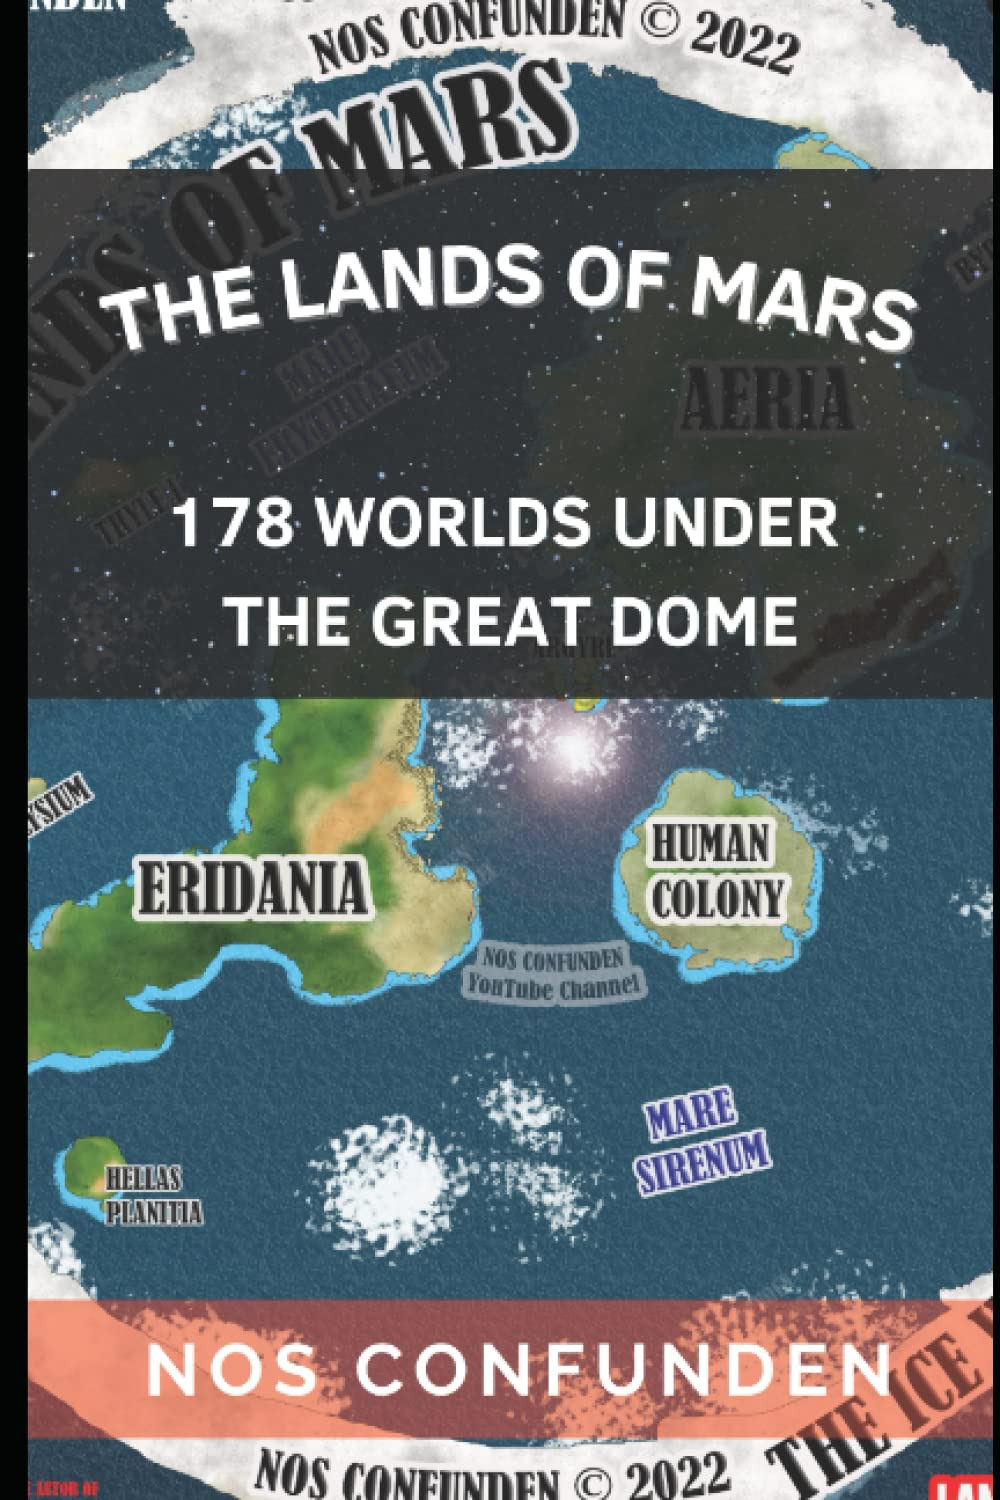 The Lands of Mars: 178 Worlds under the Great Dome (Terrainfinita: 178 Worlds un